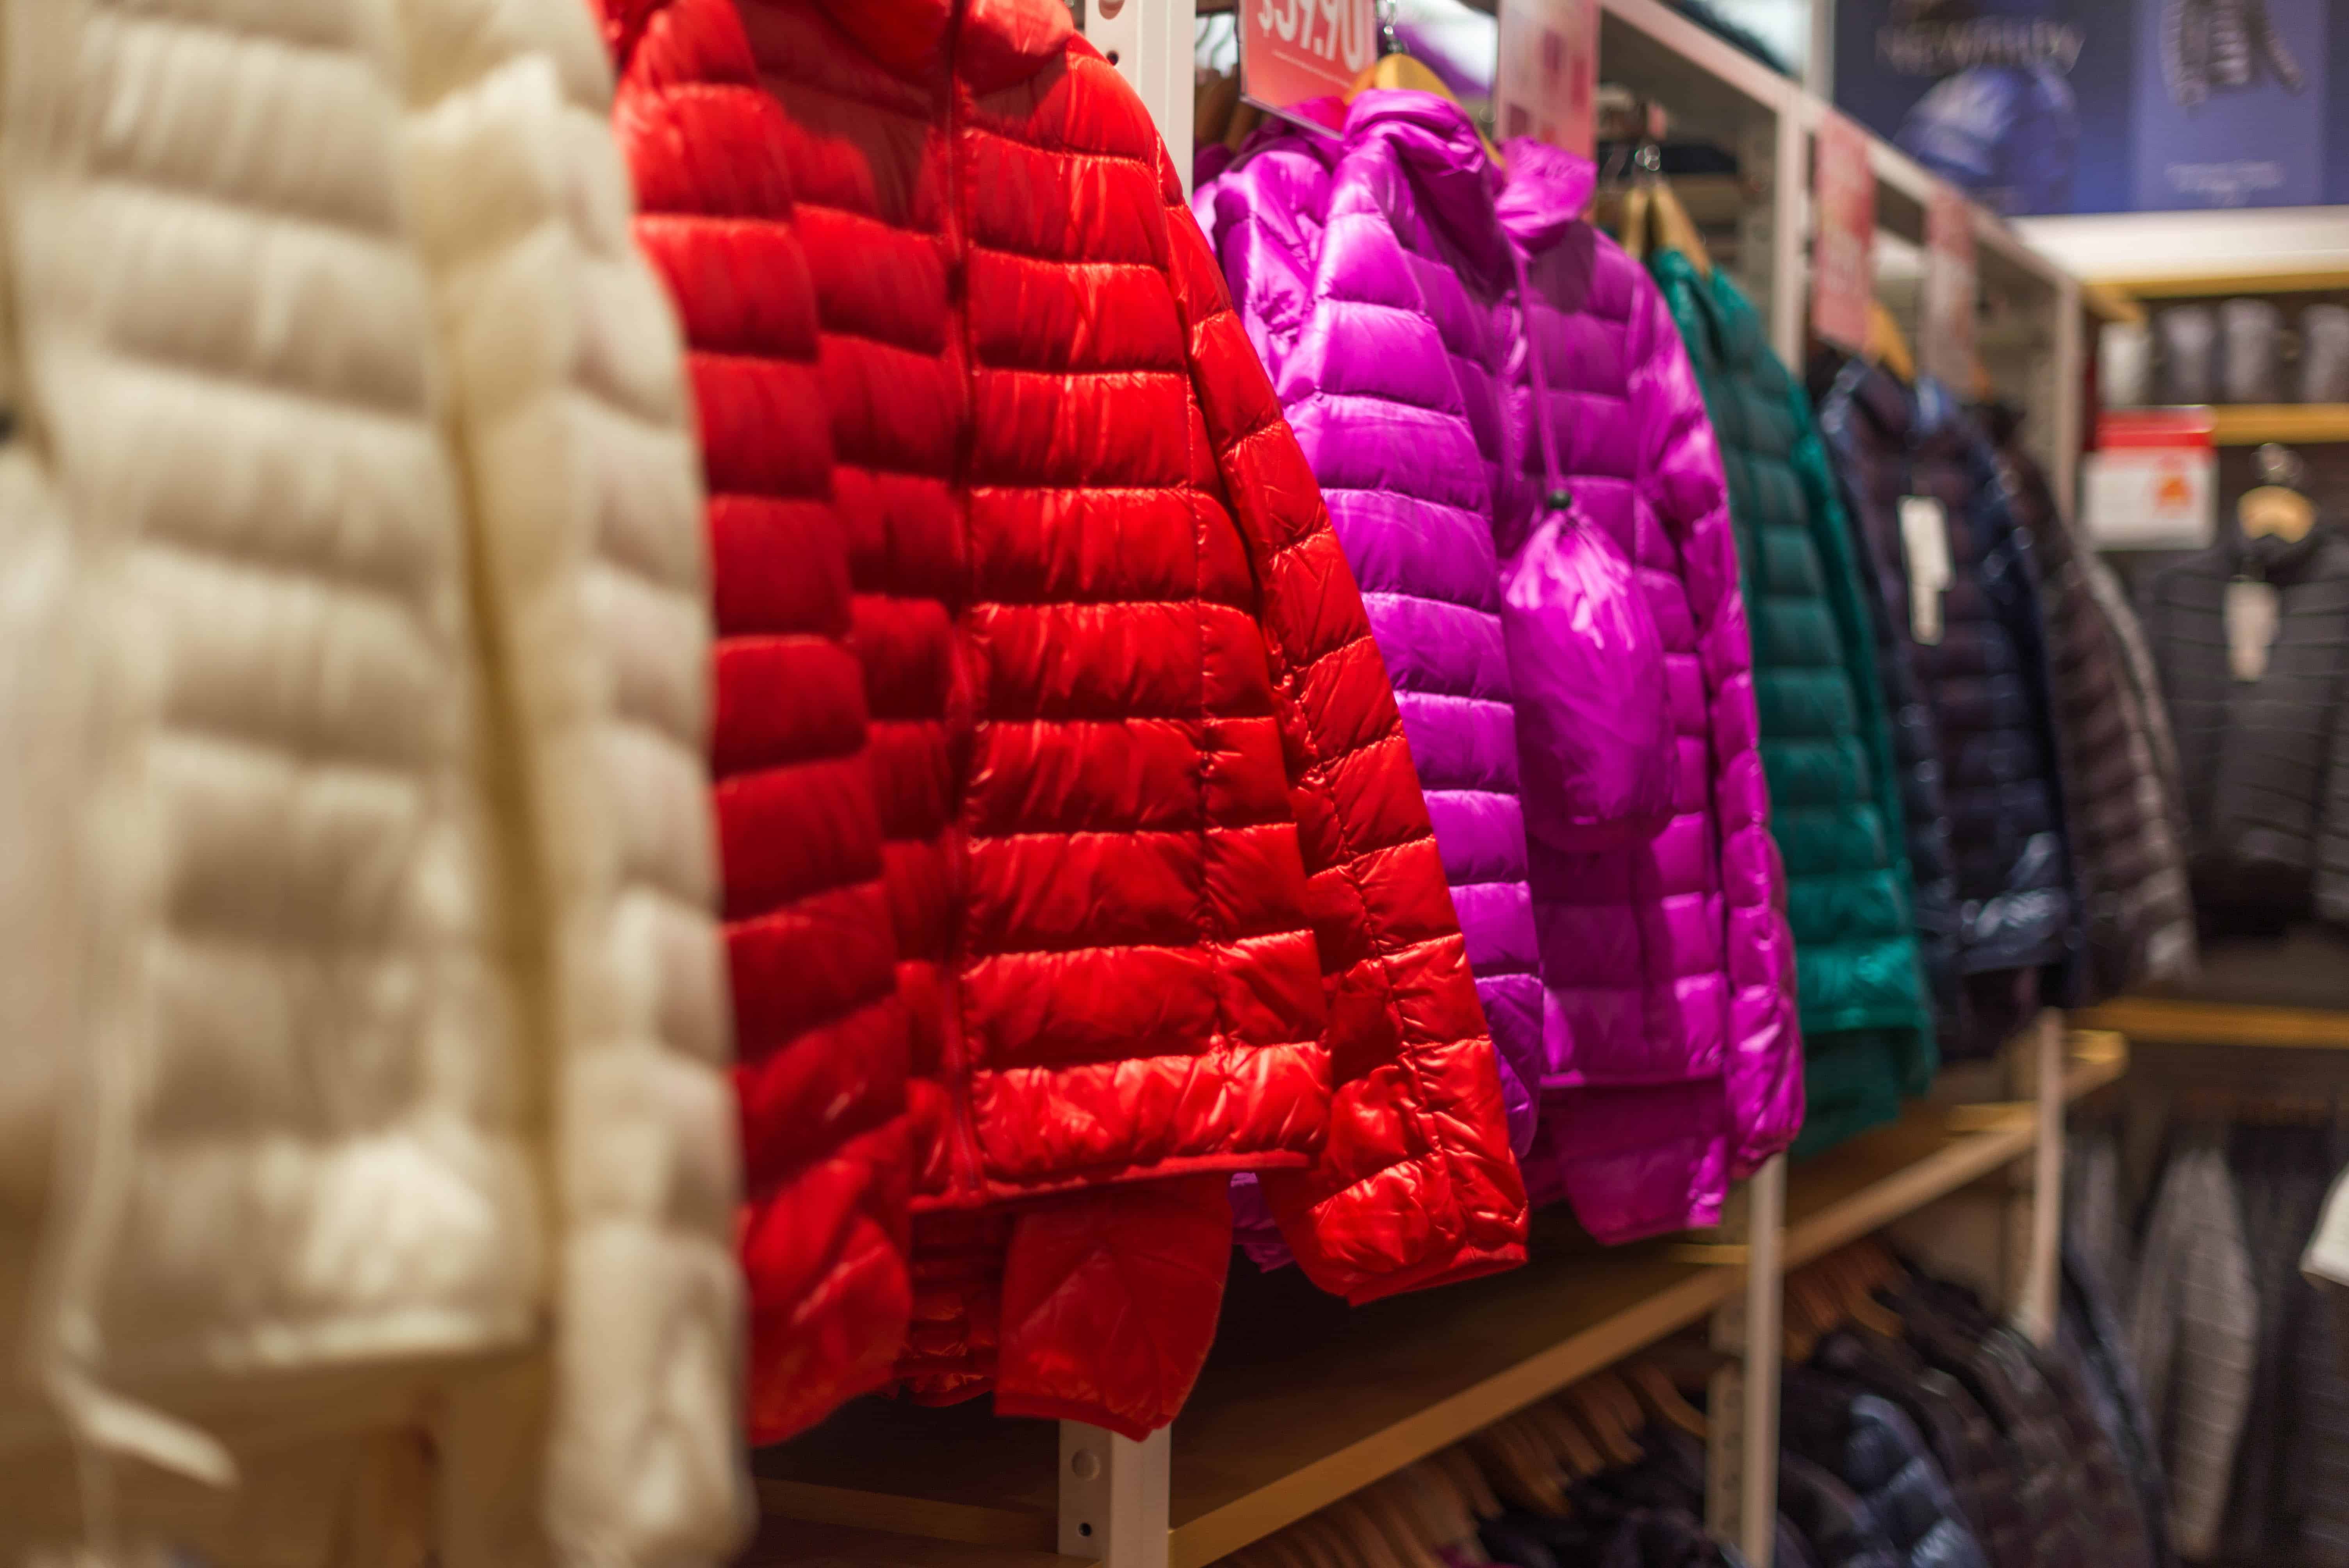 puffy winter jackets in bright colors hanging in store